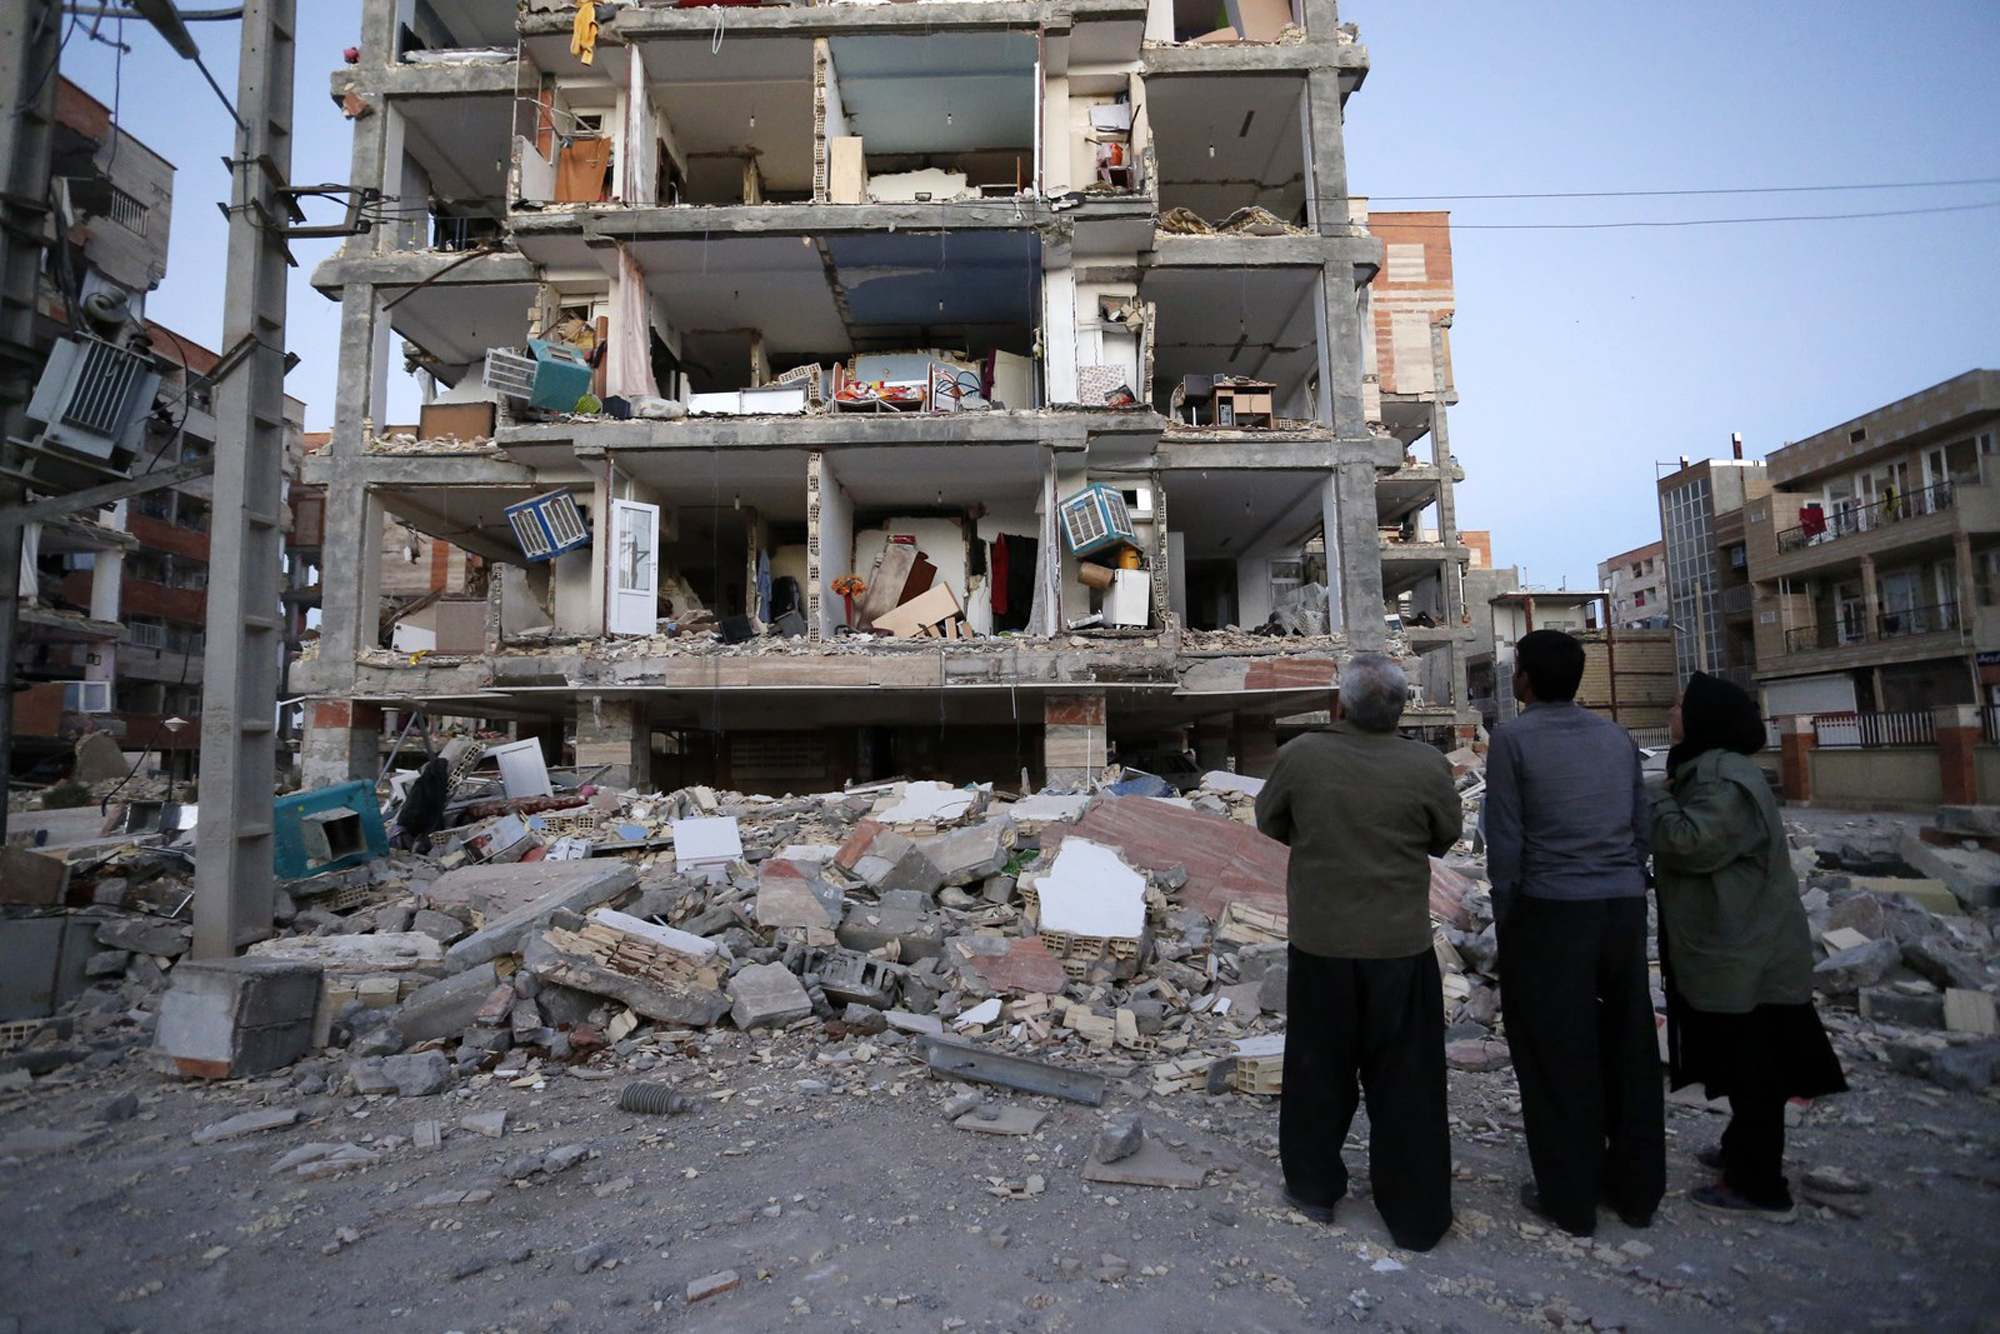 <div class='meta'><div class='origin-logo' data-origin='none'></div><span class='caption-text' data-credit='Pouria Pakizeh/ISNA via AP'>In this photo provided by the ISNA, people look at destroyed buildings after an earthquake at the city of Sarpol-e-Zahab in western Iran, Monday, Nov. 13, 2017.</span></div>